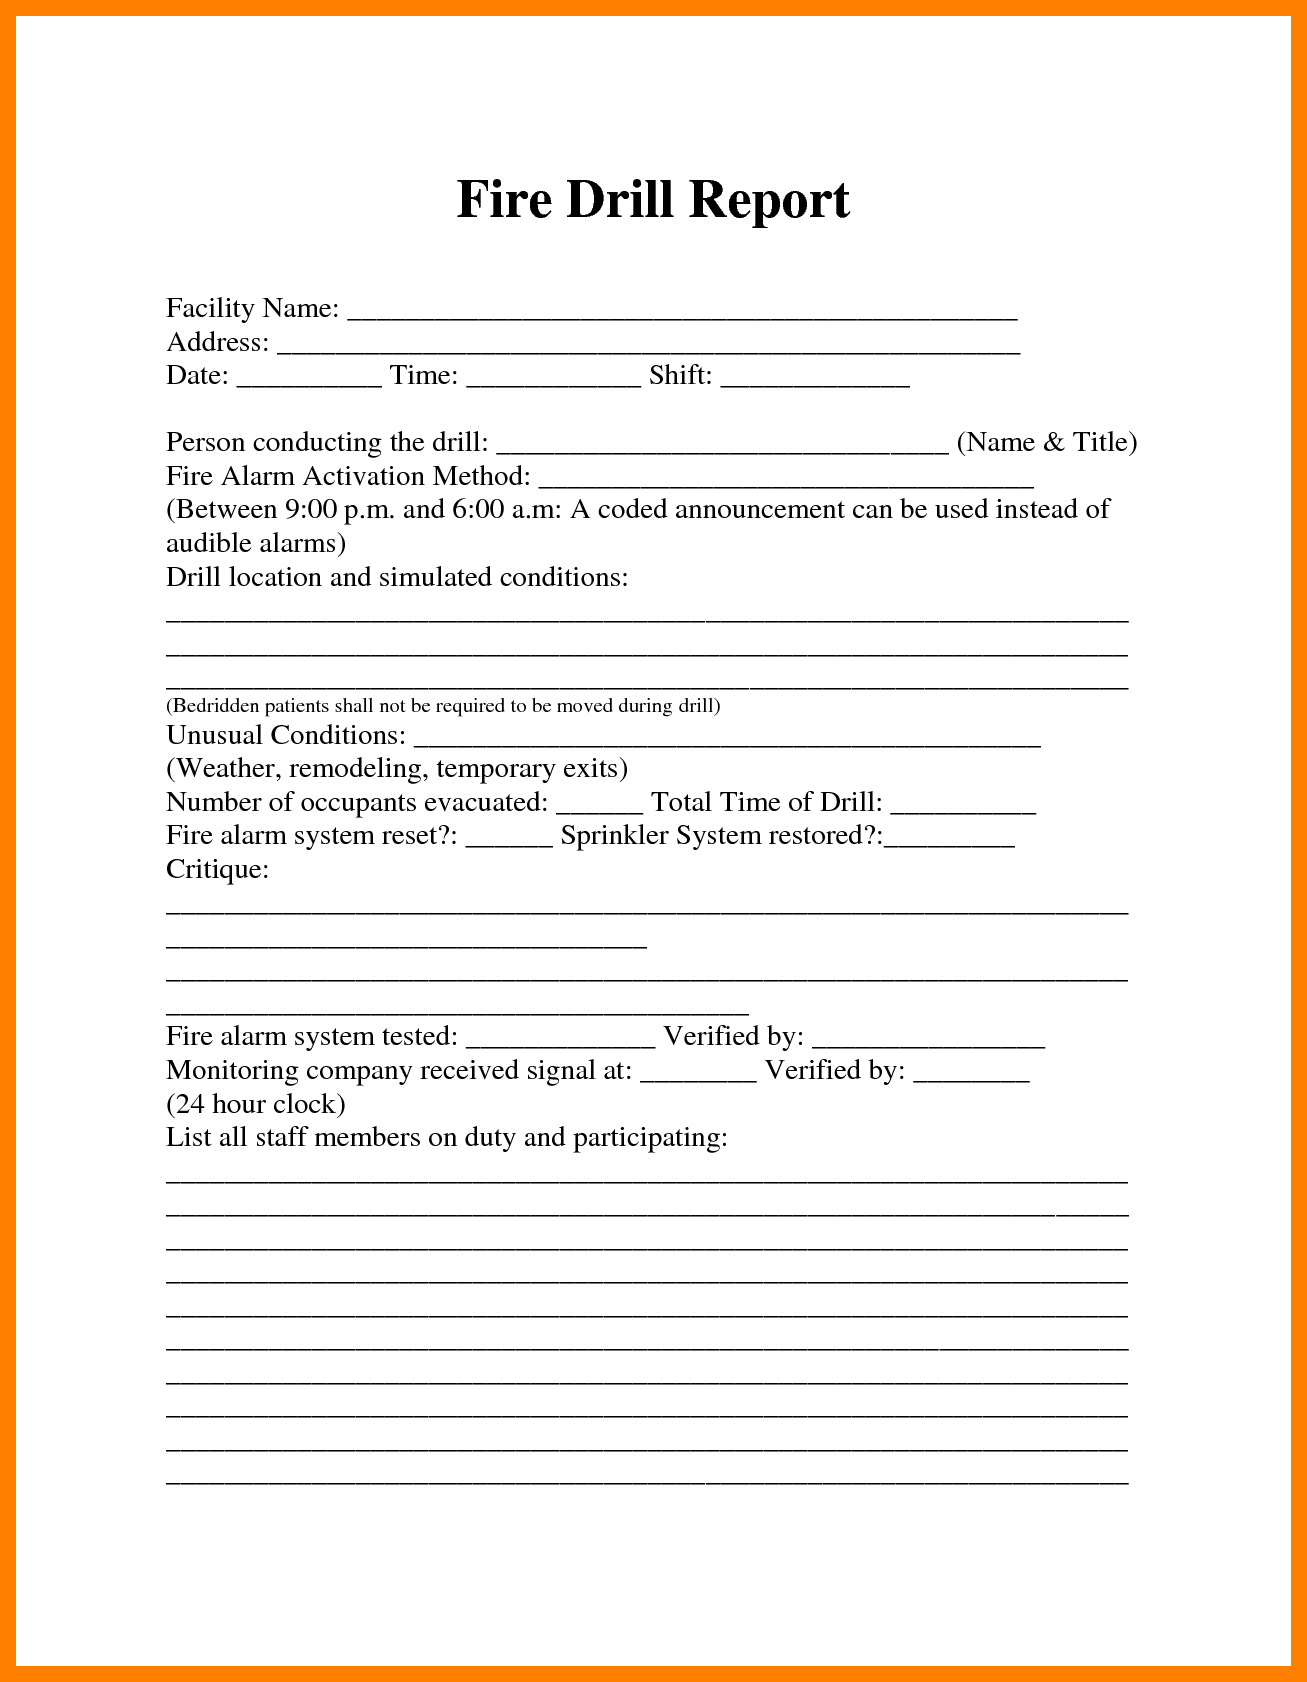 Image Result For Fire Drill Procedures For Summer Camp Within Fire Evacuation Drill Report Template